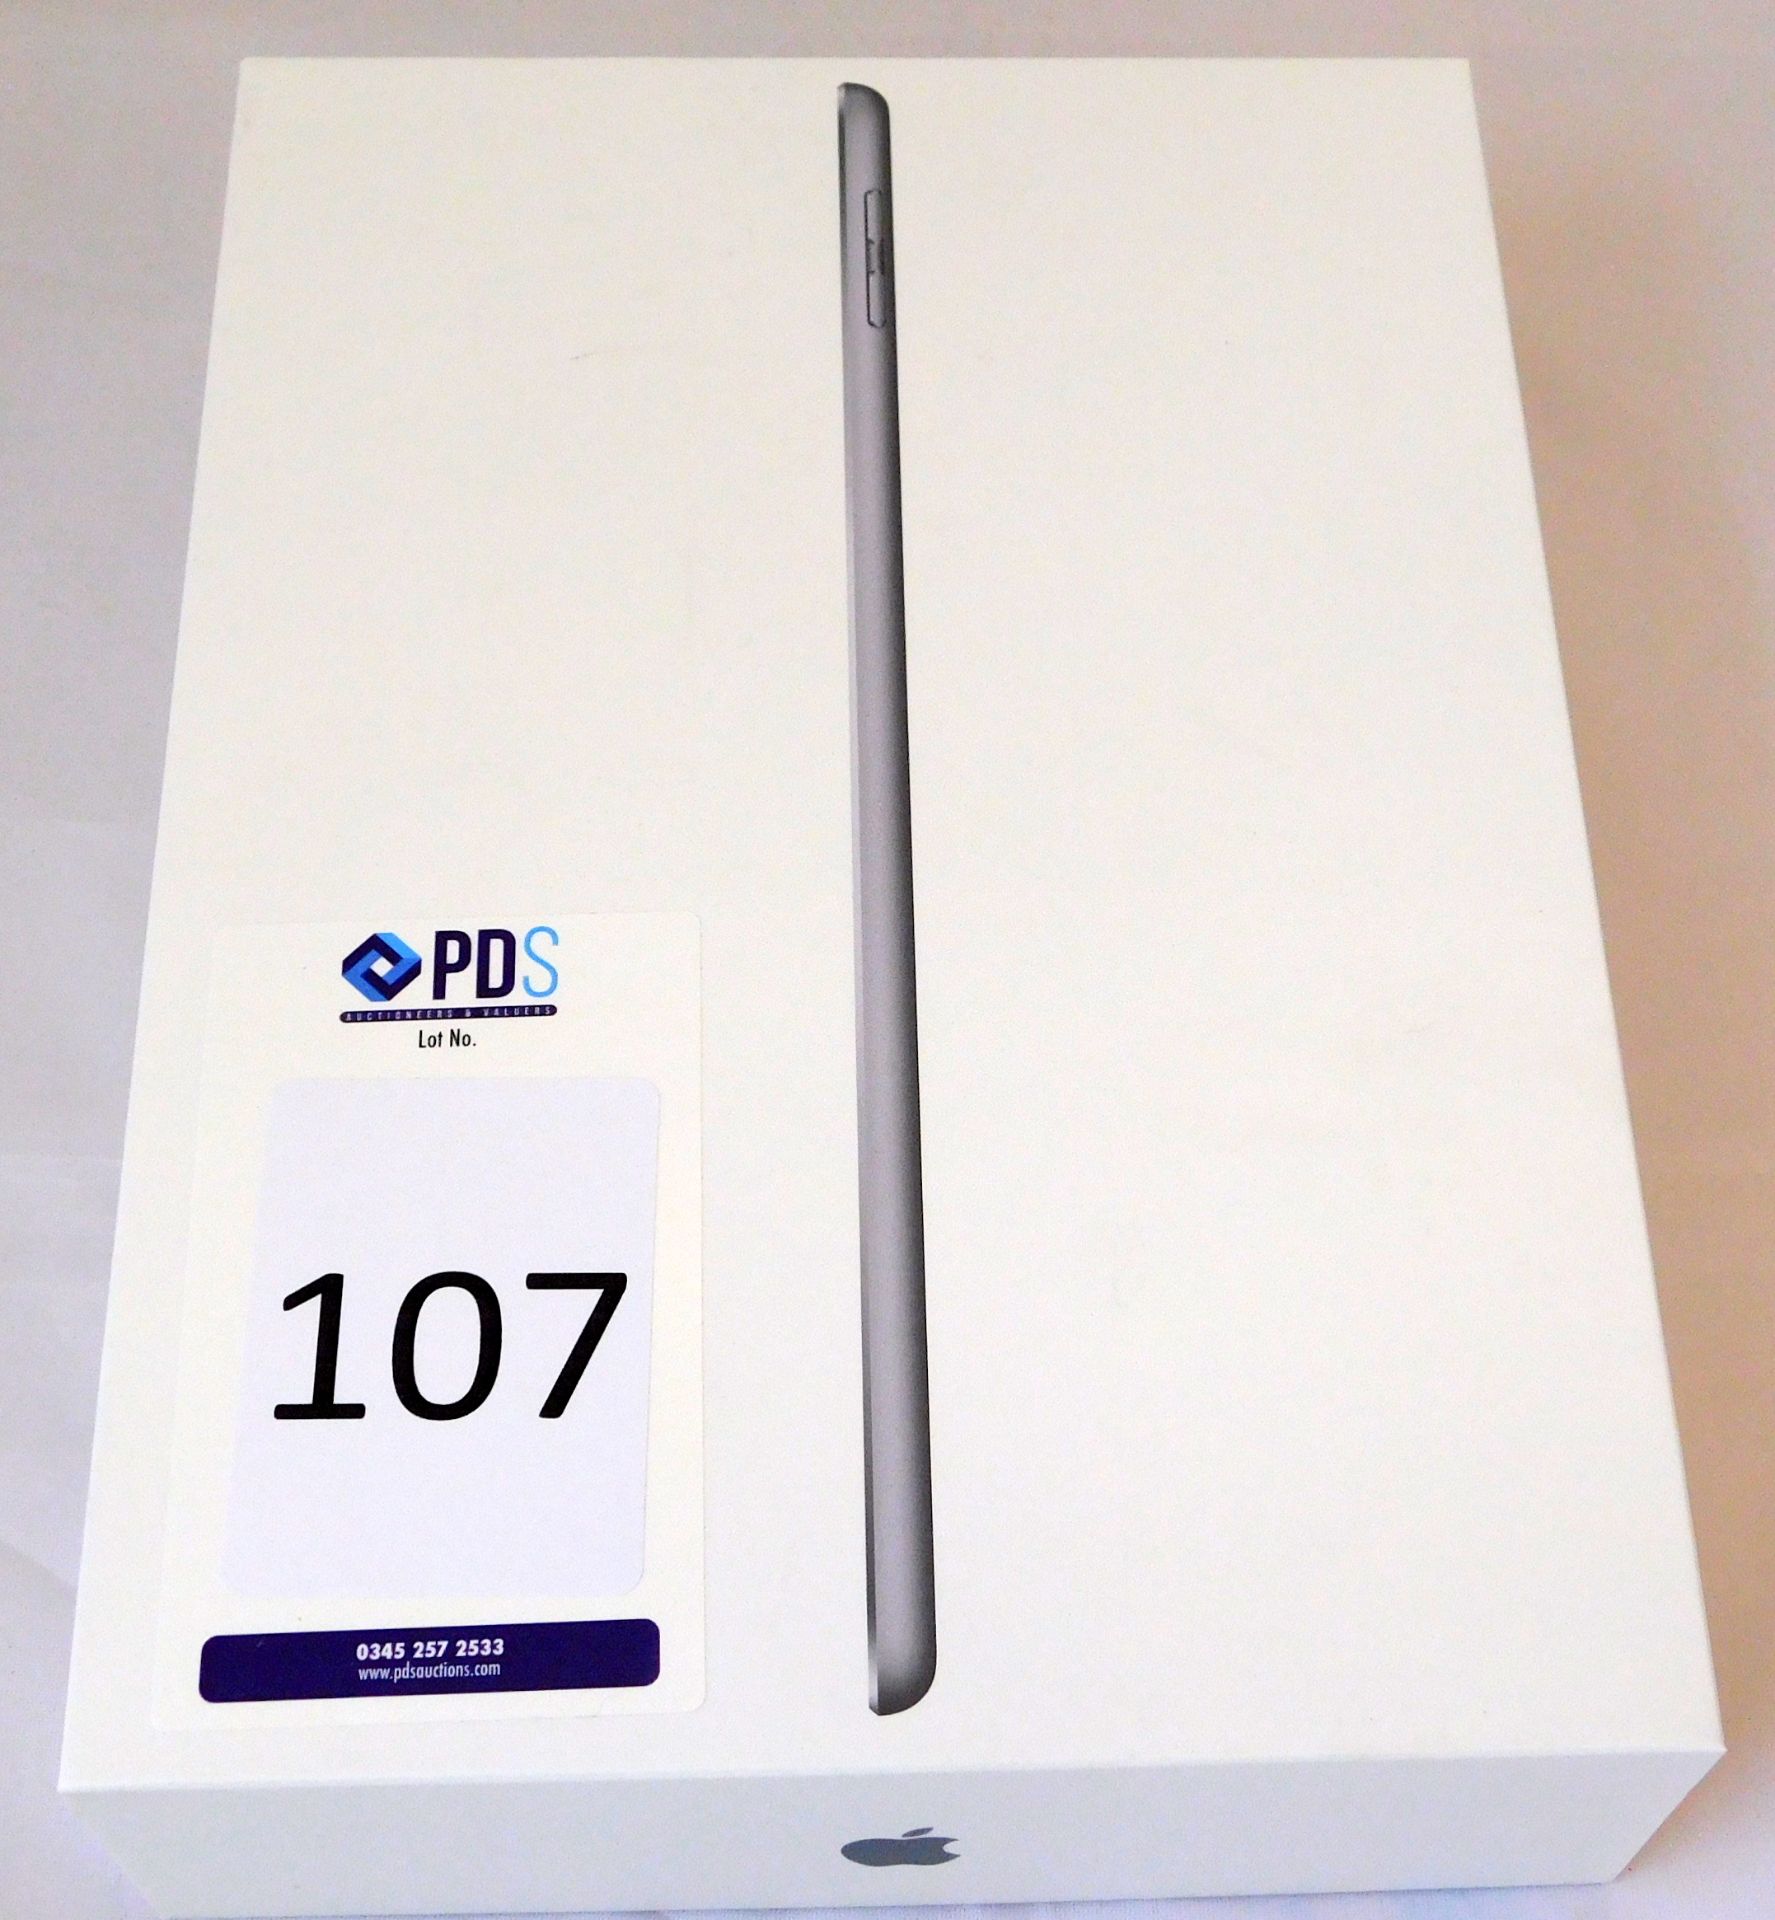 Apple A1893 iPad, 6th Gen, 32GB, Space Grey, Serial Number: F9FY26FMJF8J, (New in Box) (Located